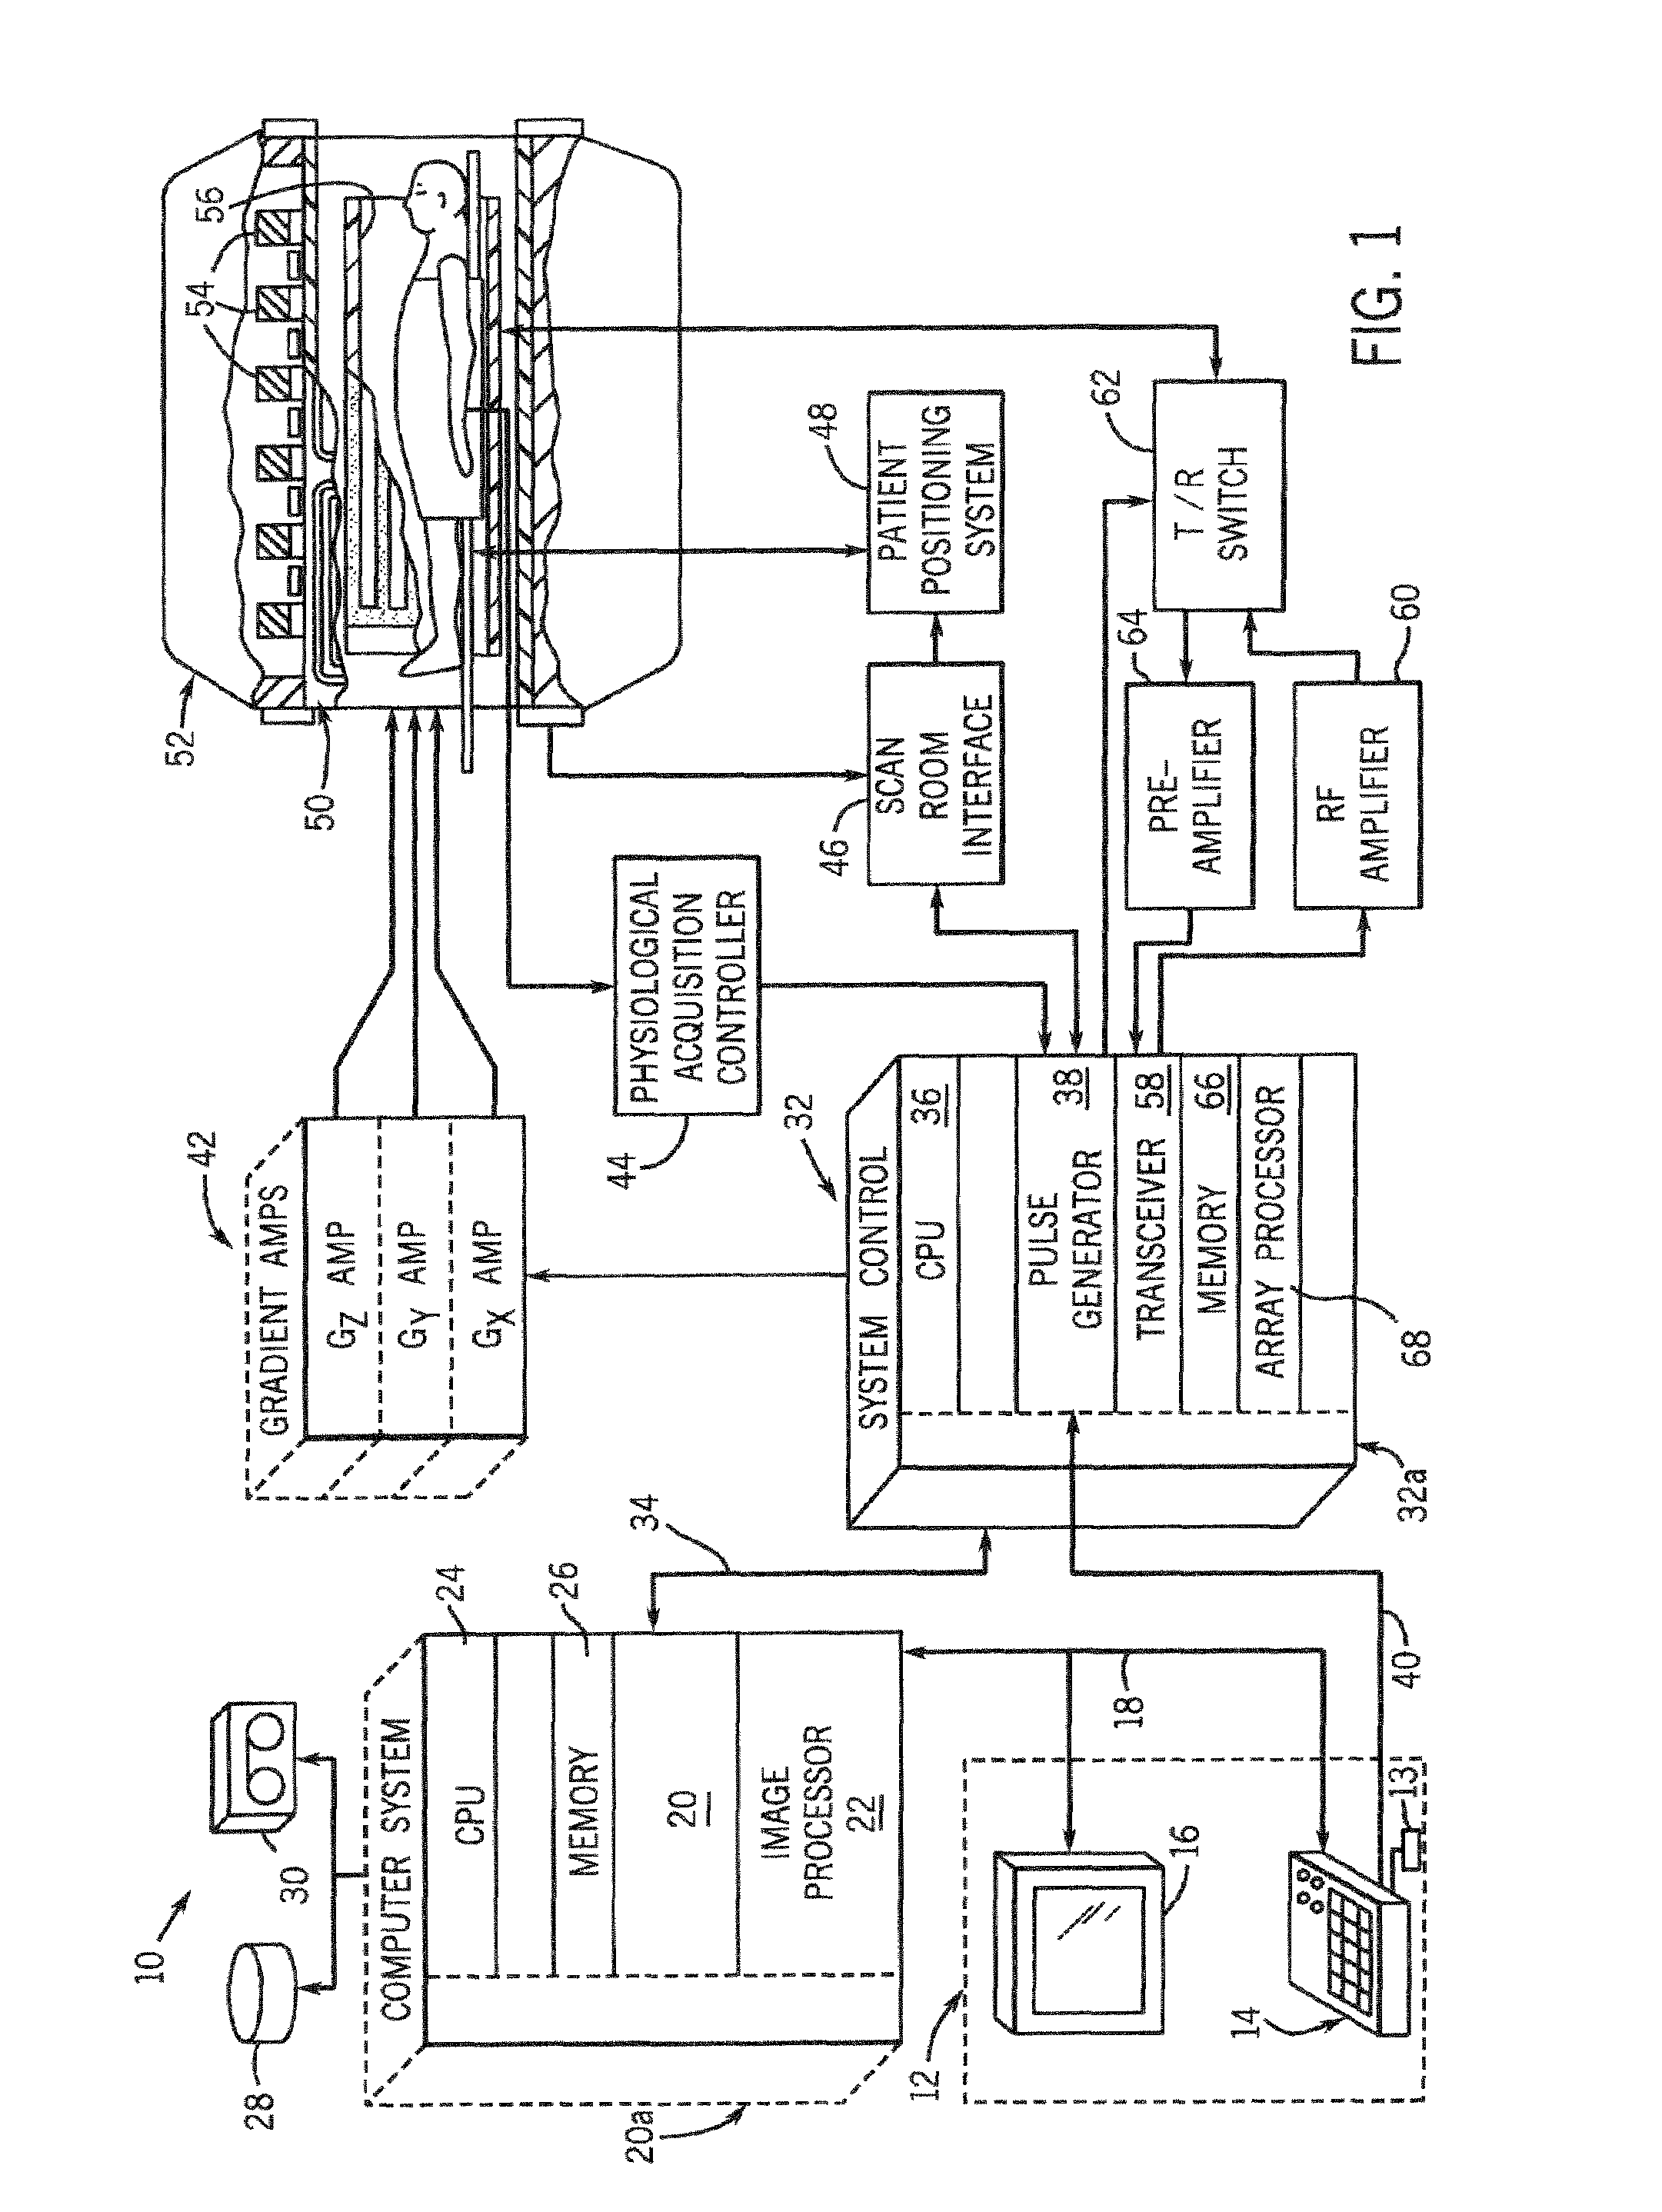 RF body coil with acoustic isolation of conductors